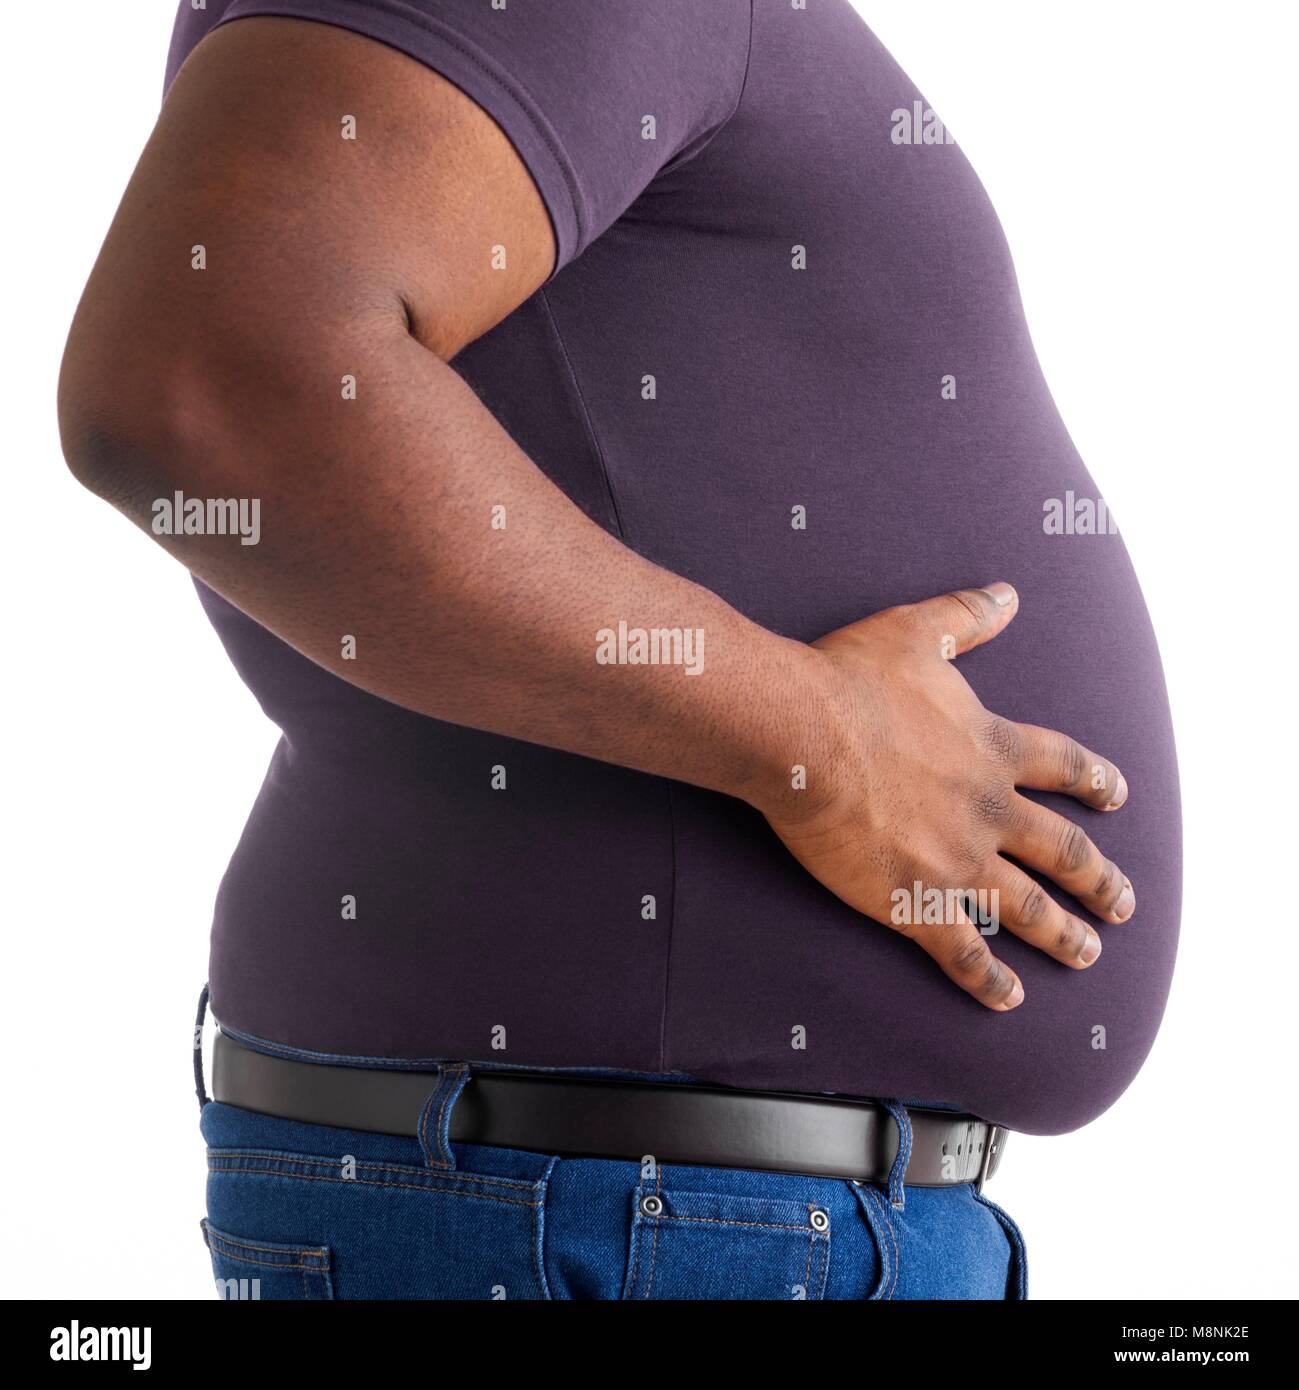 Overweight man with his hand on his stomach, side view. Stock Photo